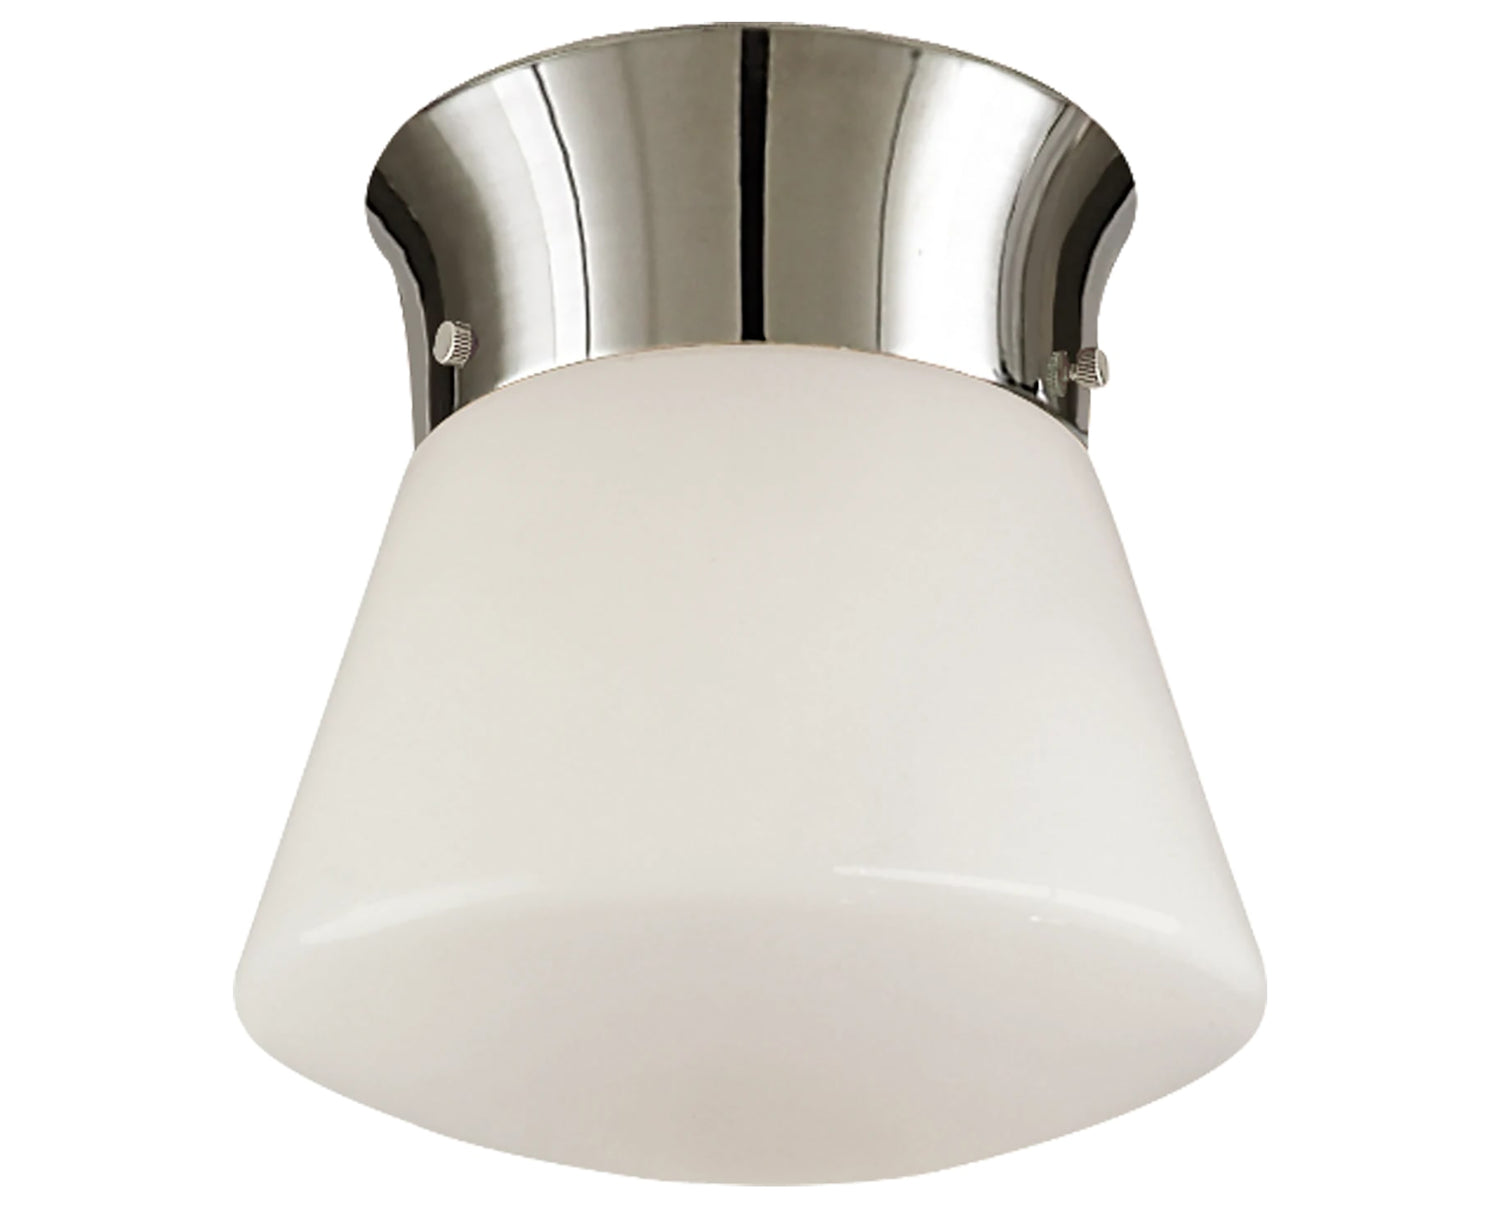 Polished Nickel & White Glass | Perry Ceiling Light | Valley Ridge Furniture